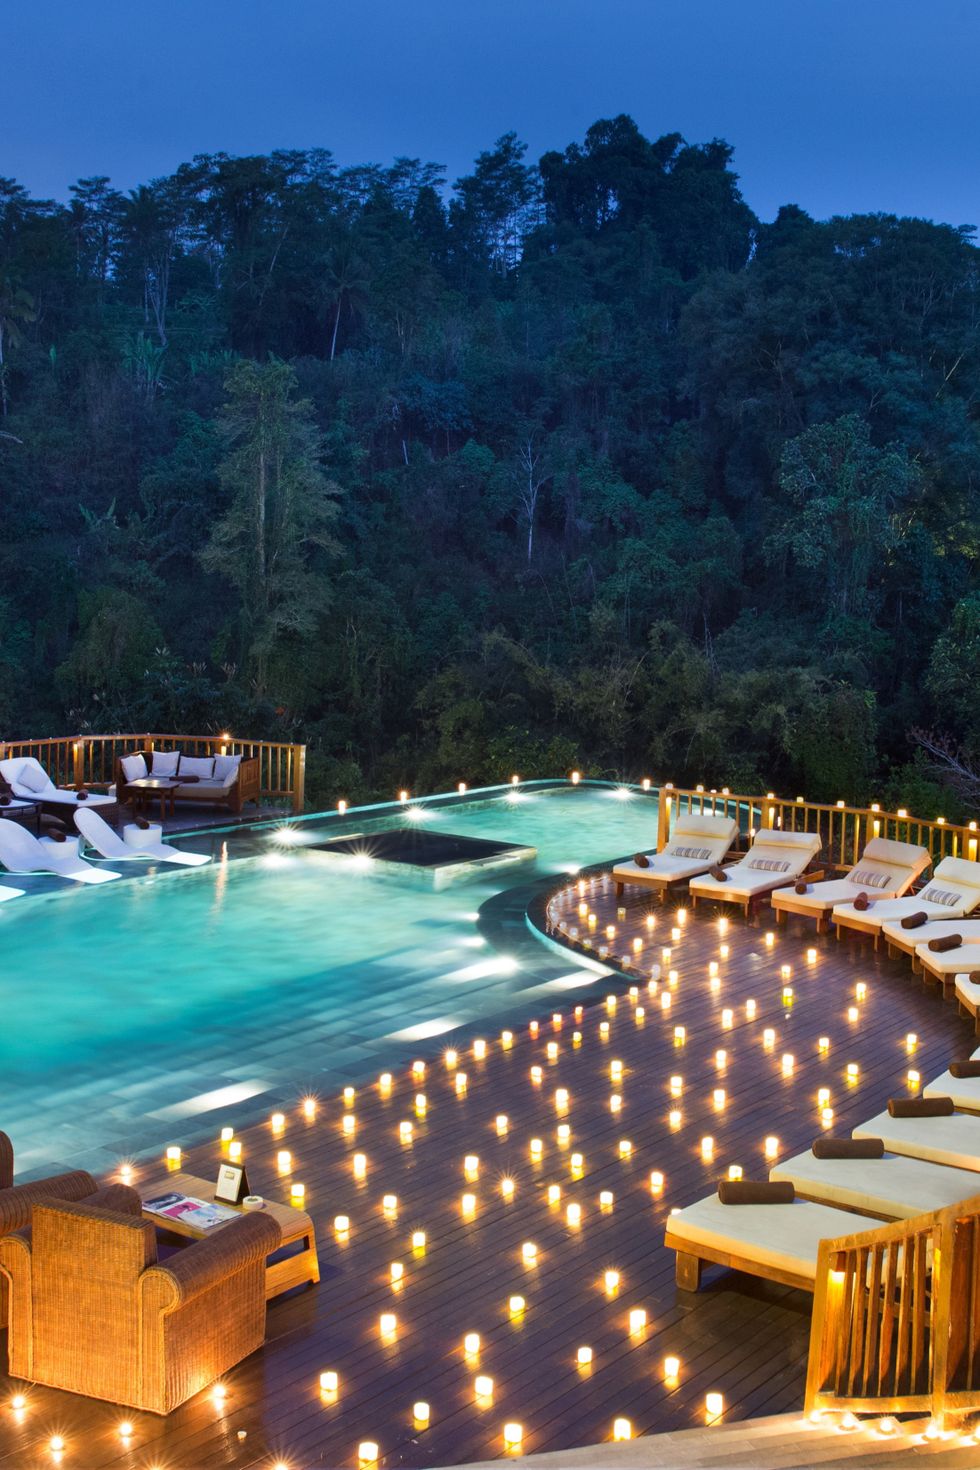 The infinity pool at Hanging Gardens of Bali hotel.